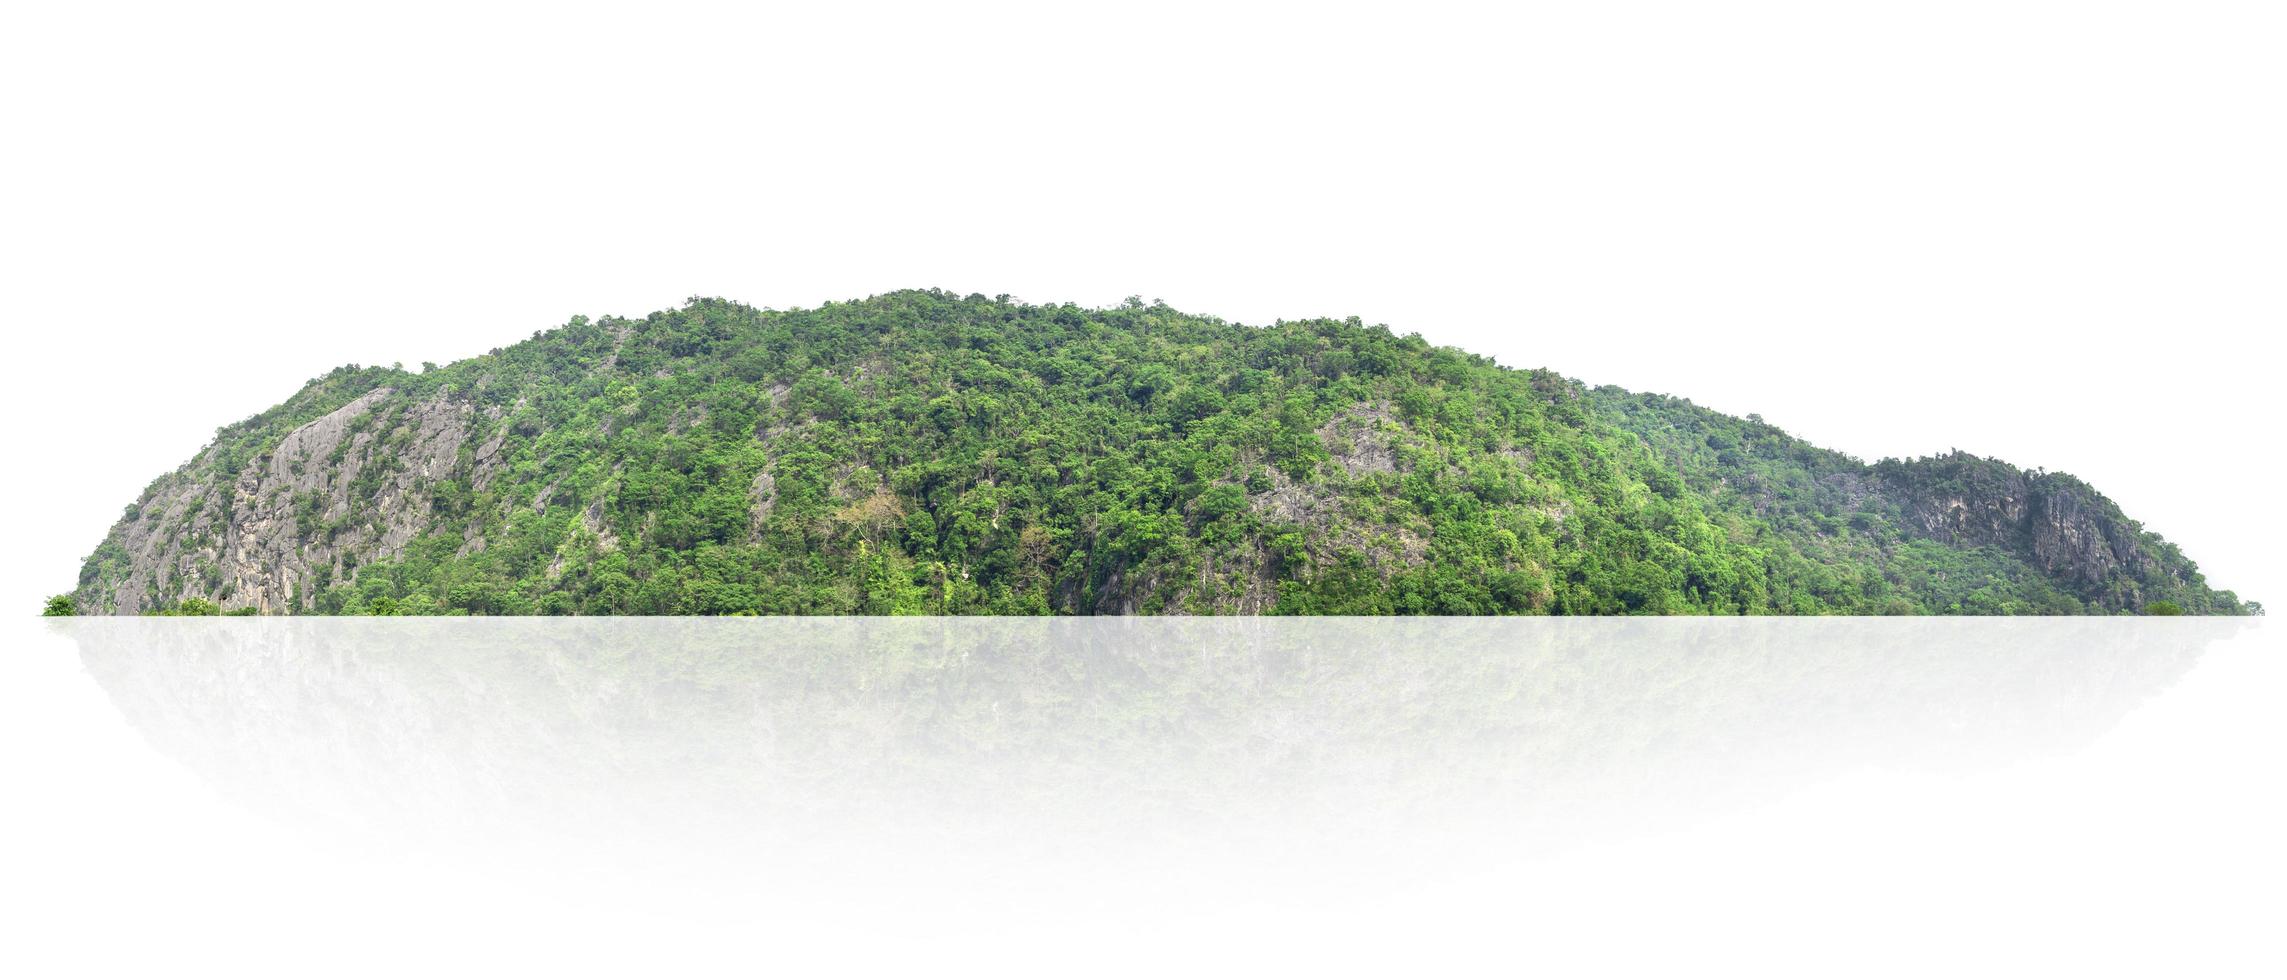 rock mountain hill with green forest isolate on white background photo